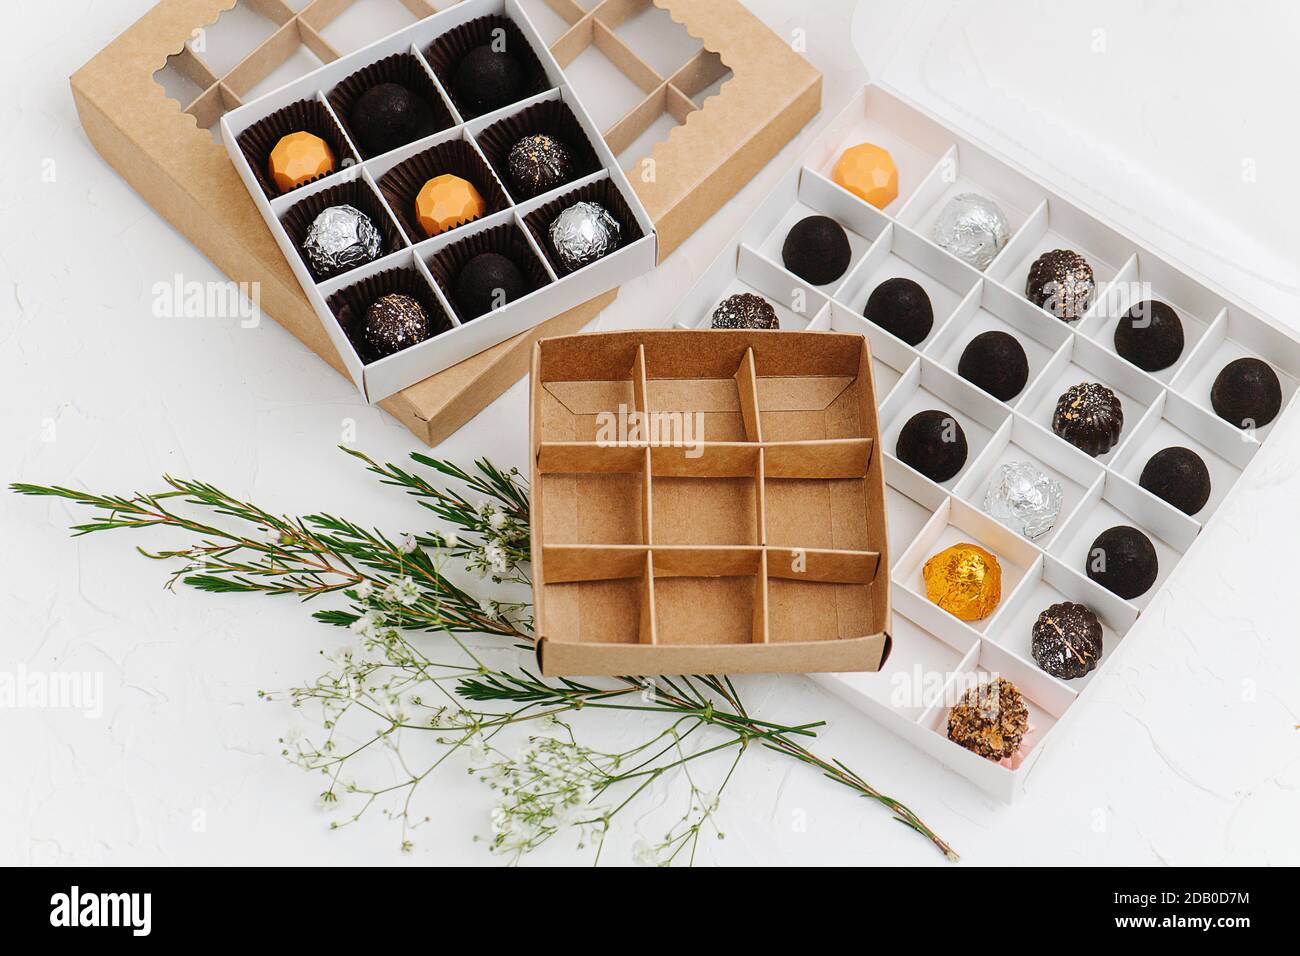 Fancy wrapped chocolate candies in sectioned boxes next to empty ones Stock Photo